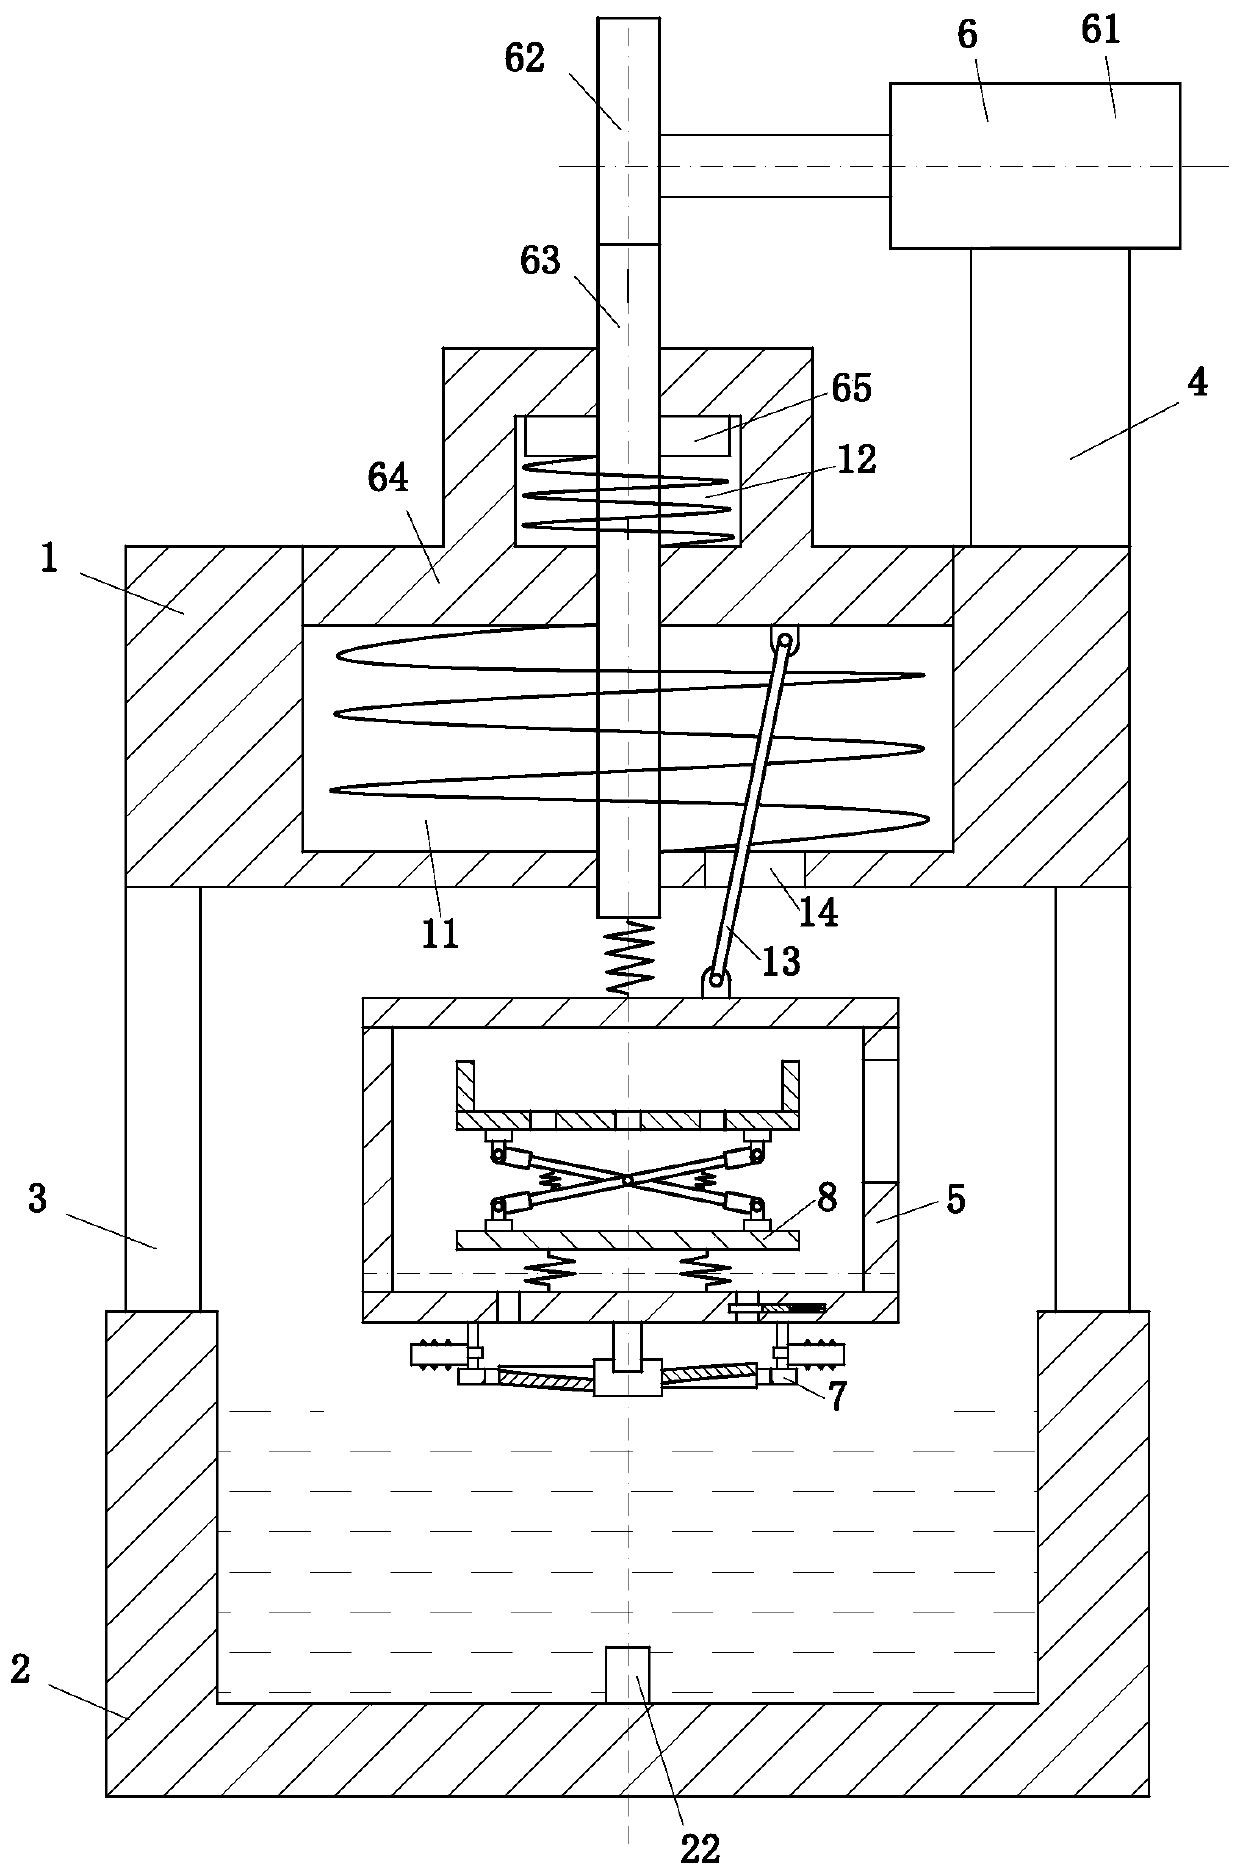 A semiconductor diode electroplating processing system